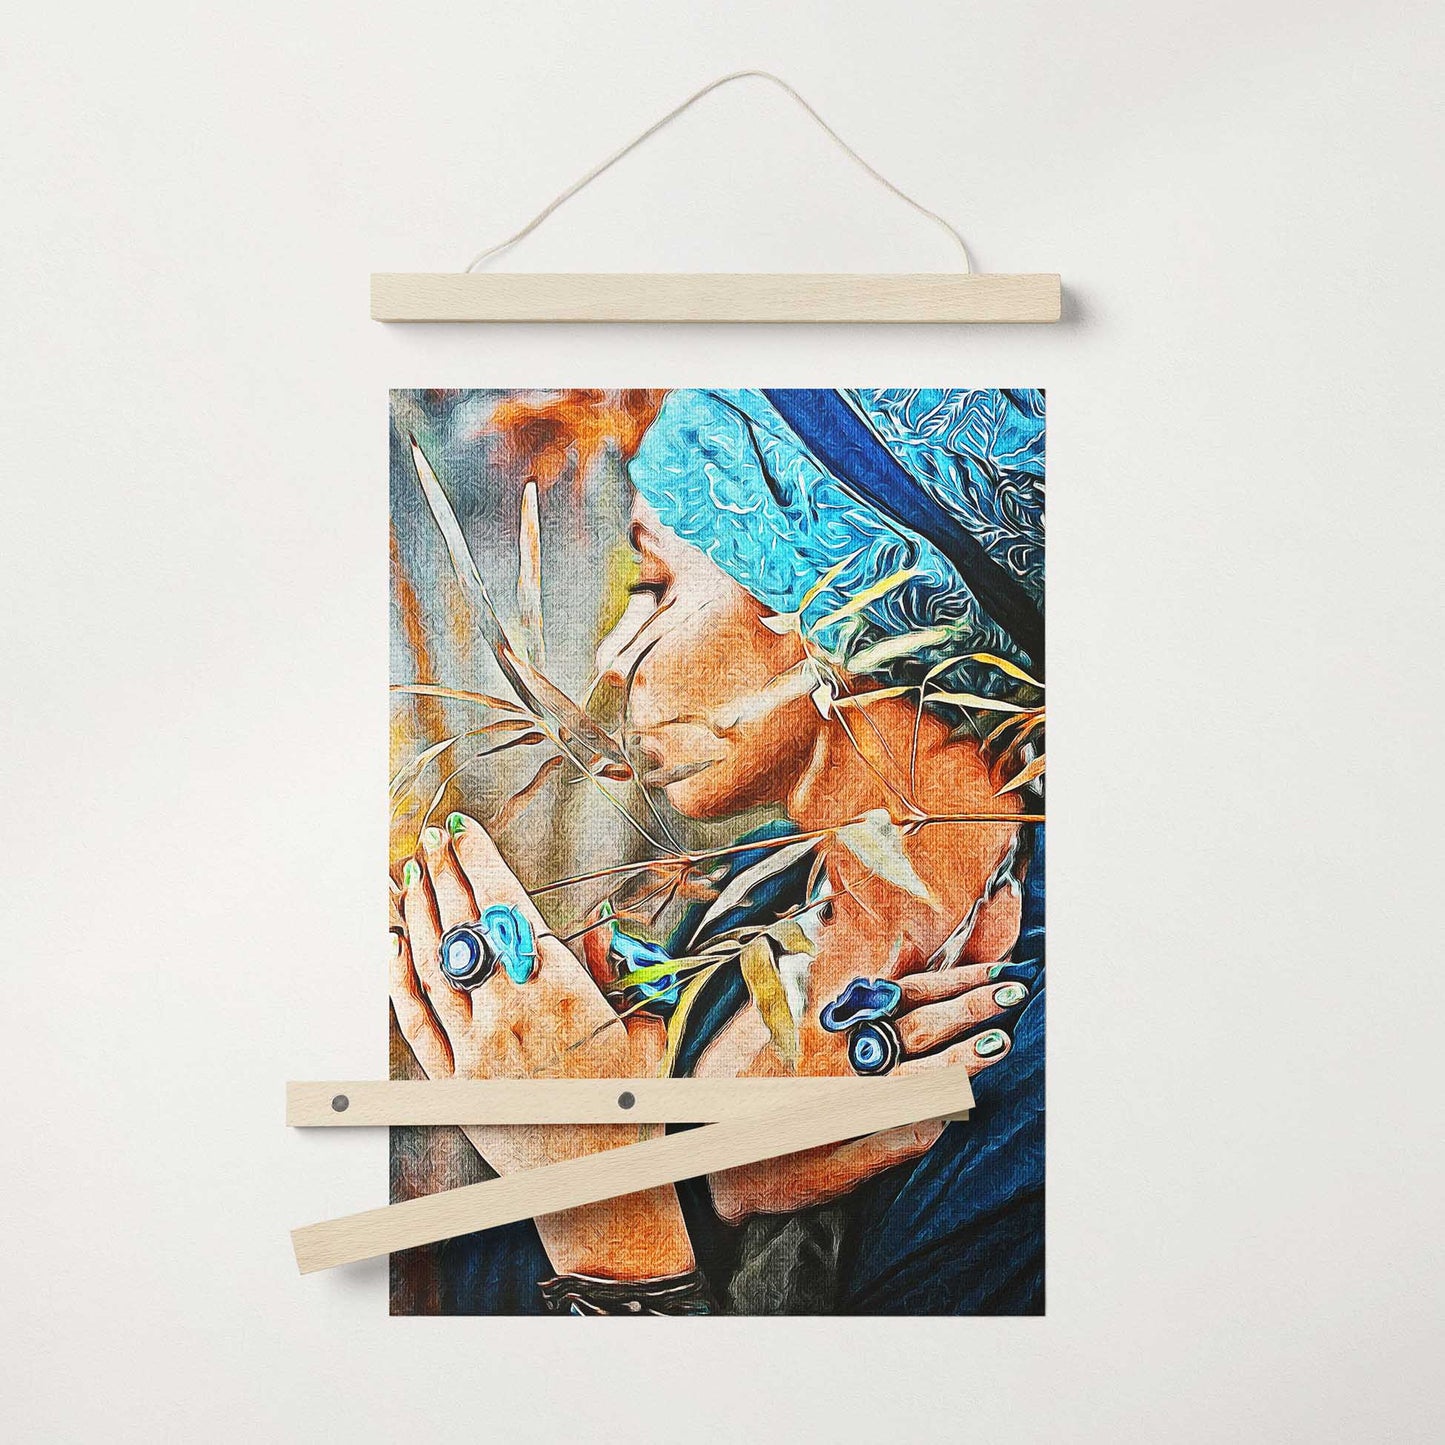 Elevate your interior design with the Personalised Artistic Oil Painting Poster Hanger. This exquisite piece, painted in a traditional and classic oil painting style, embodies authenticity and sophistication, vibrant colors 